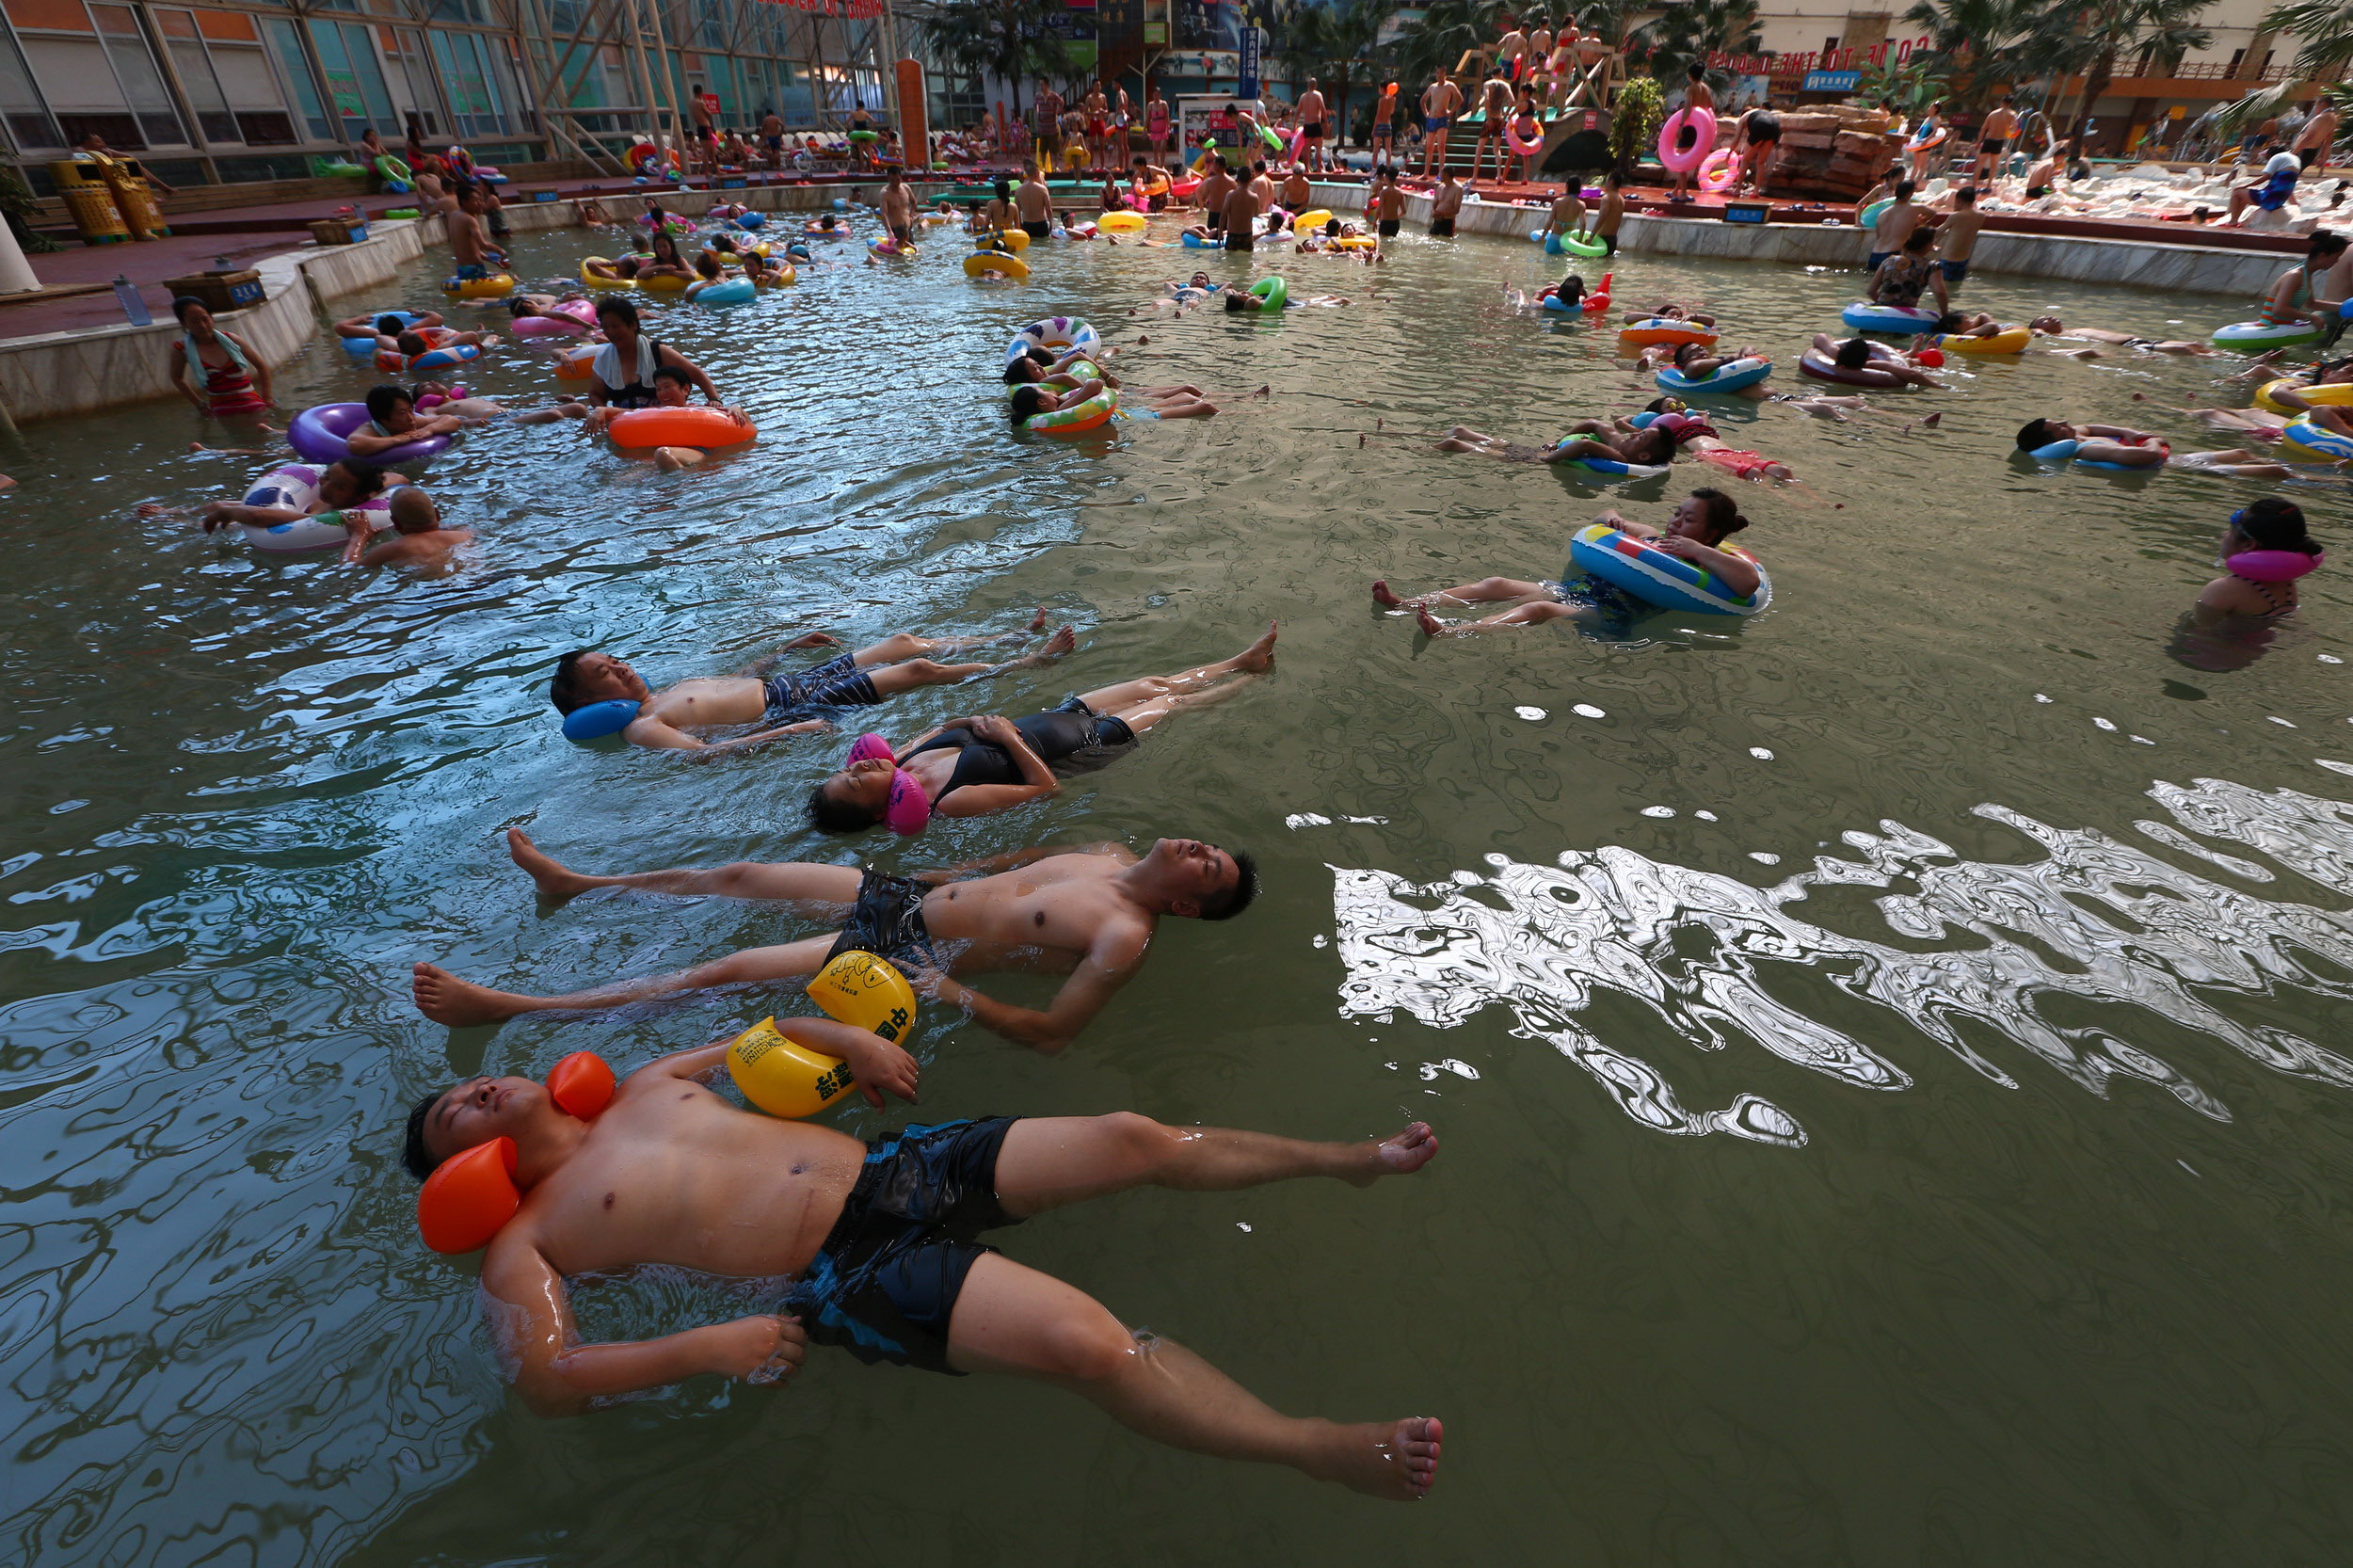 PHOTO: Thousands of people enjoy the water at the Chinese Dead Sea tourist resort as the outside temperatures reached 100 degrees on July 25, 2014 in Suining, China.